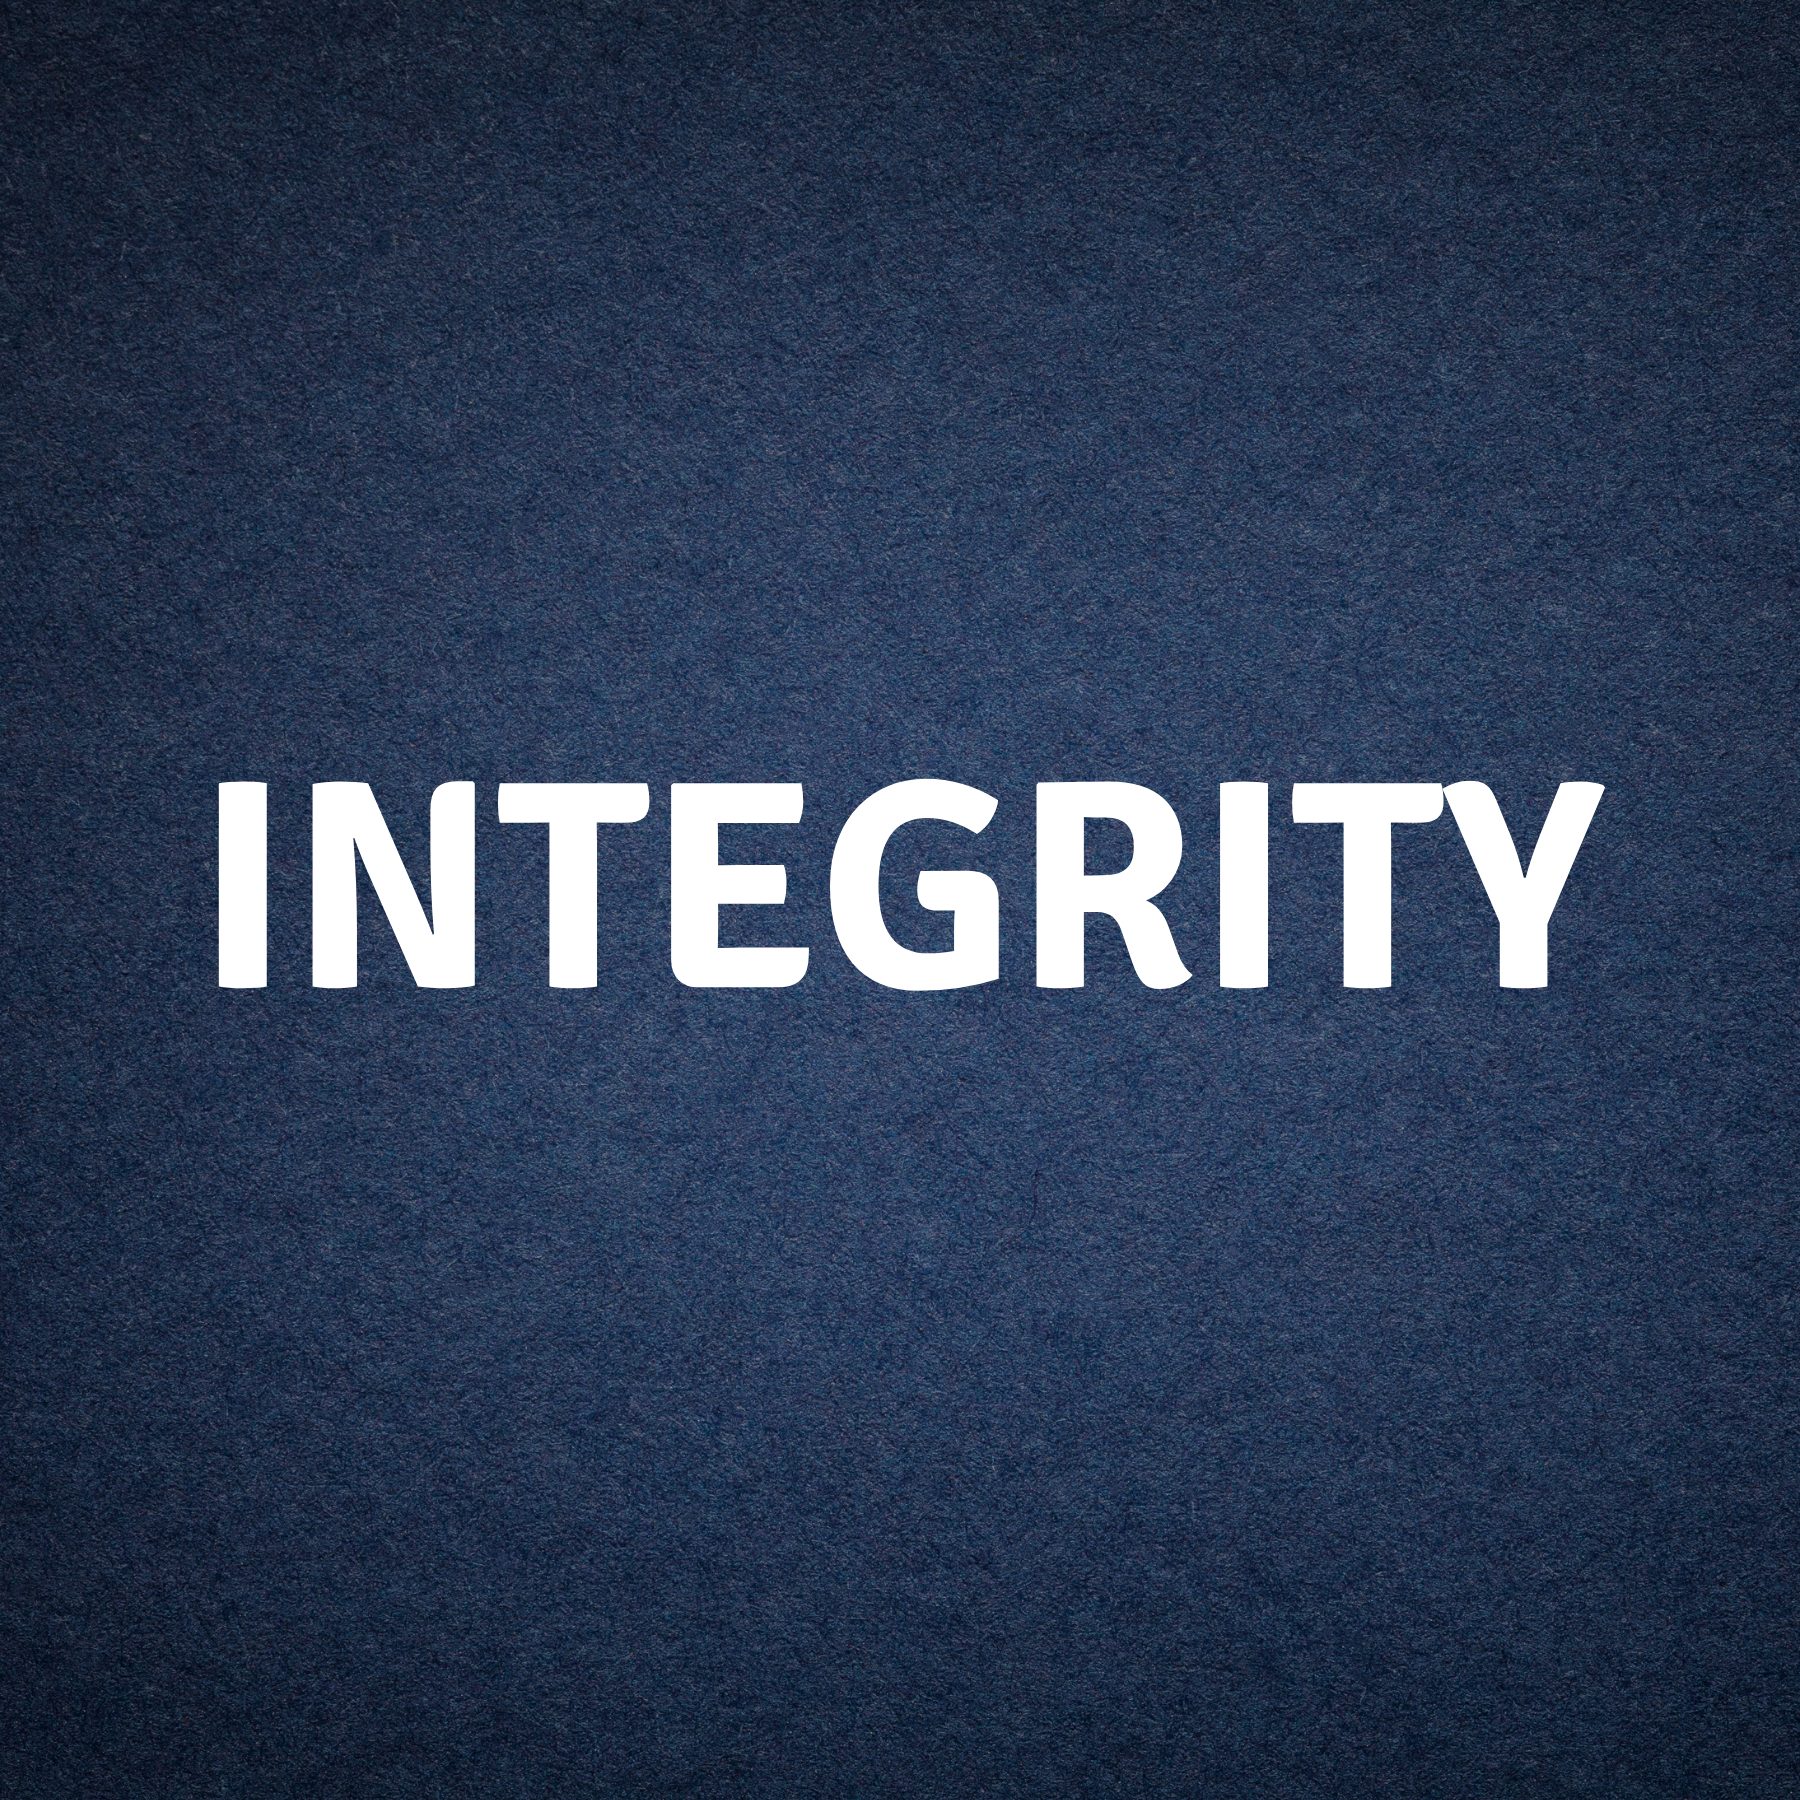 Integrity (2).png